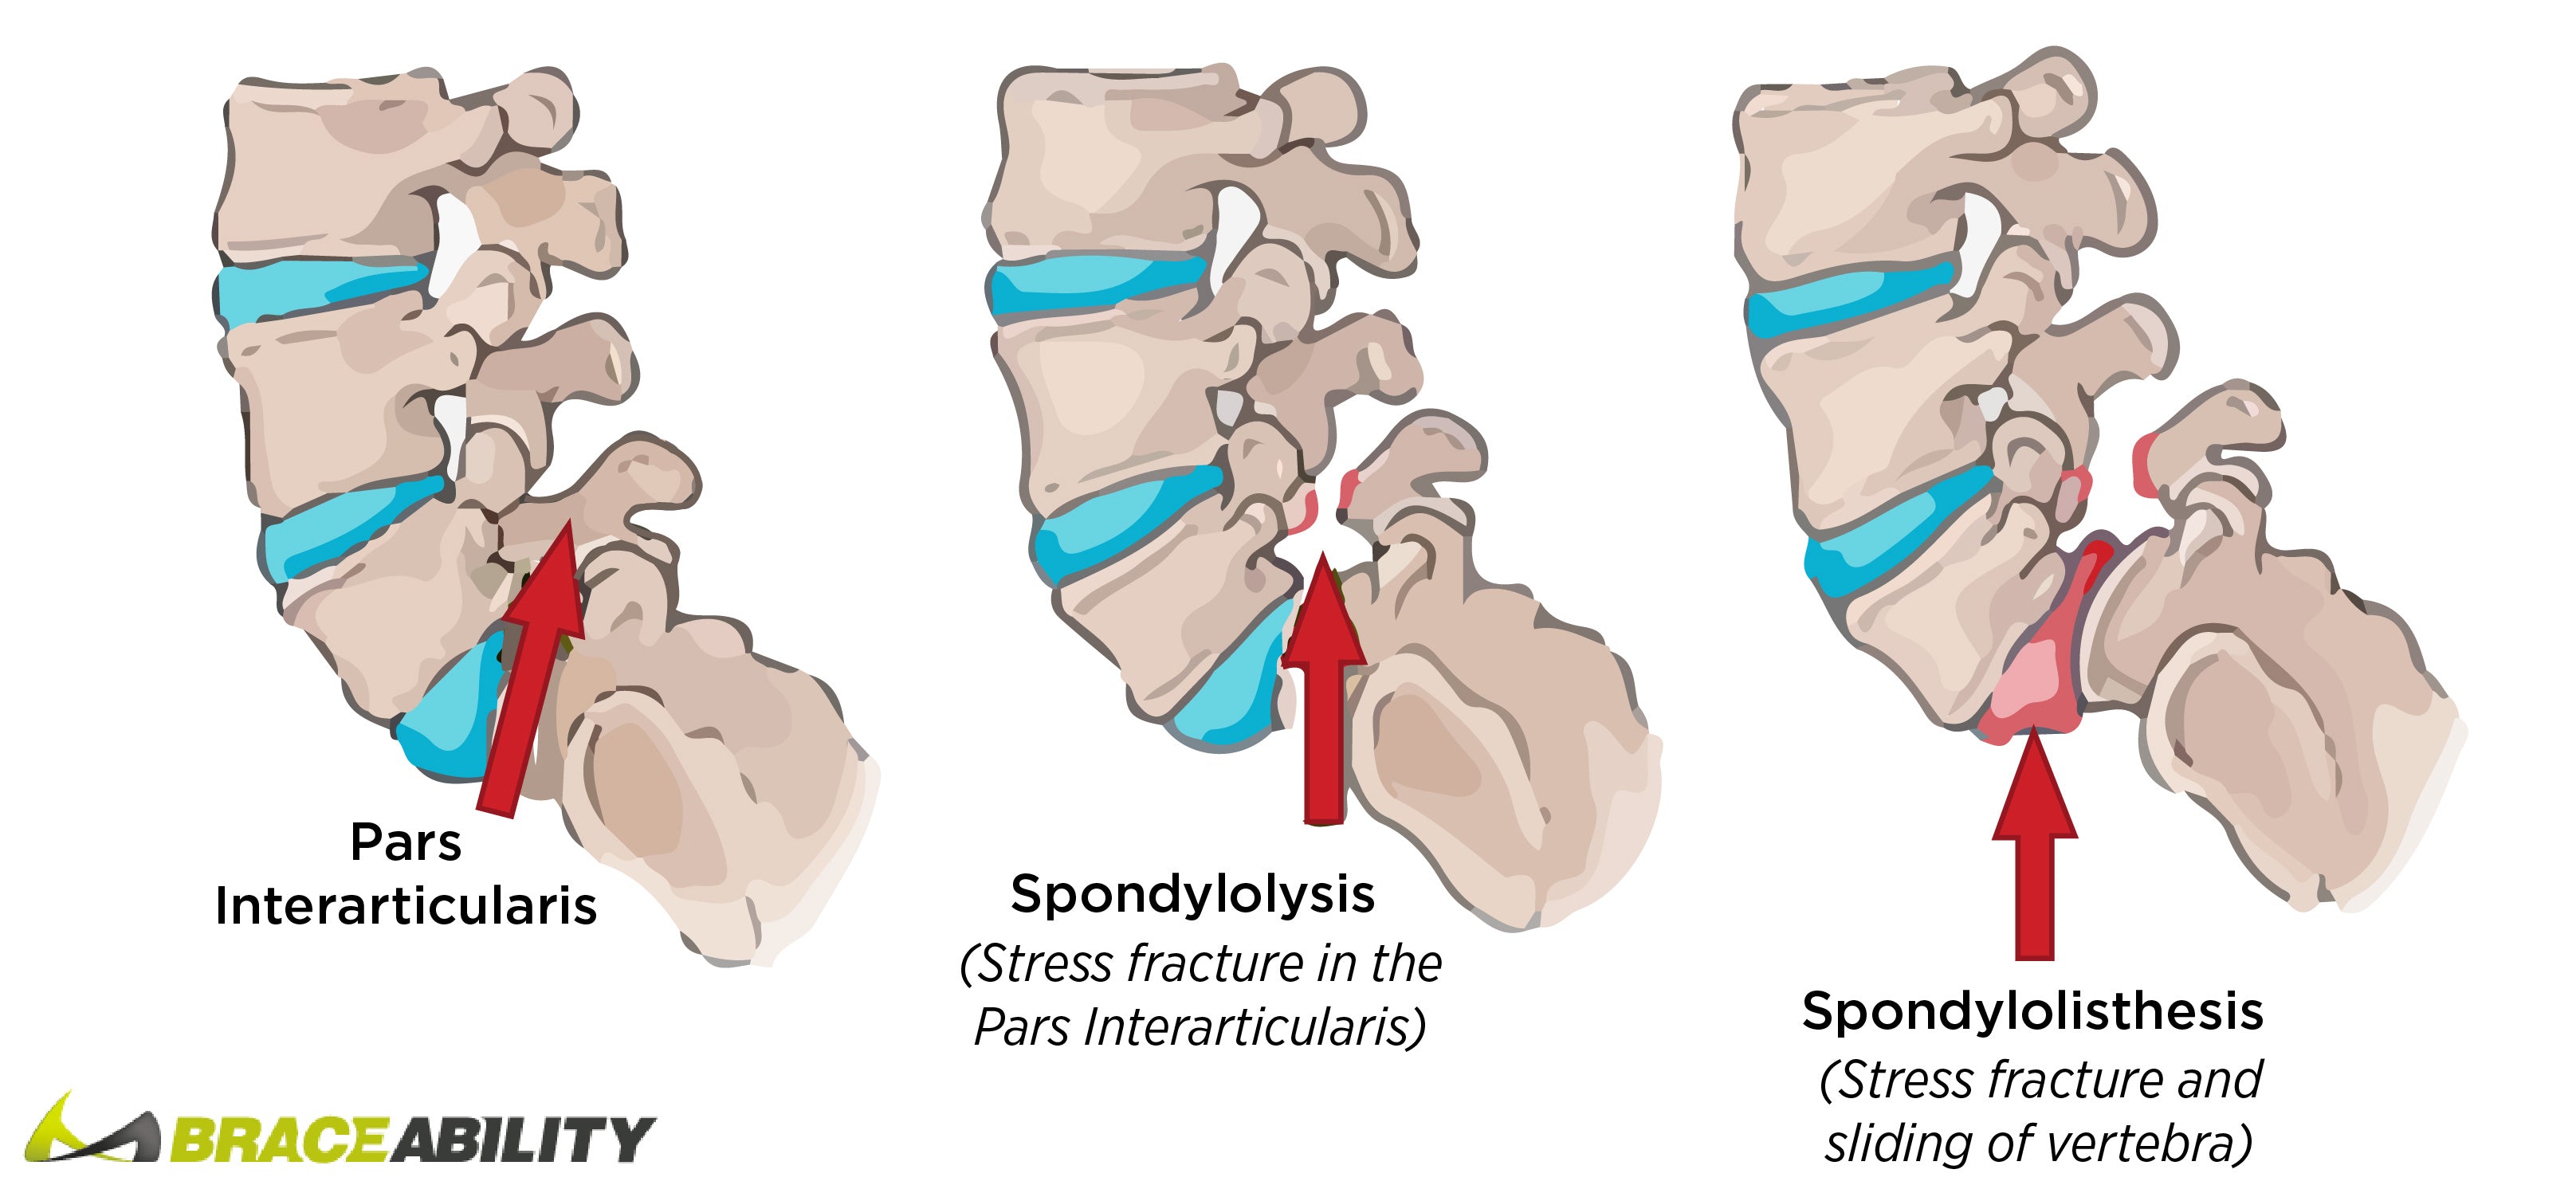 How spondylolisthesis and spondylolysis differ and how to treat them